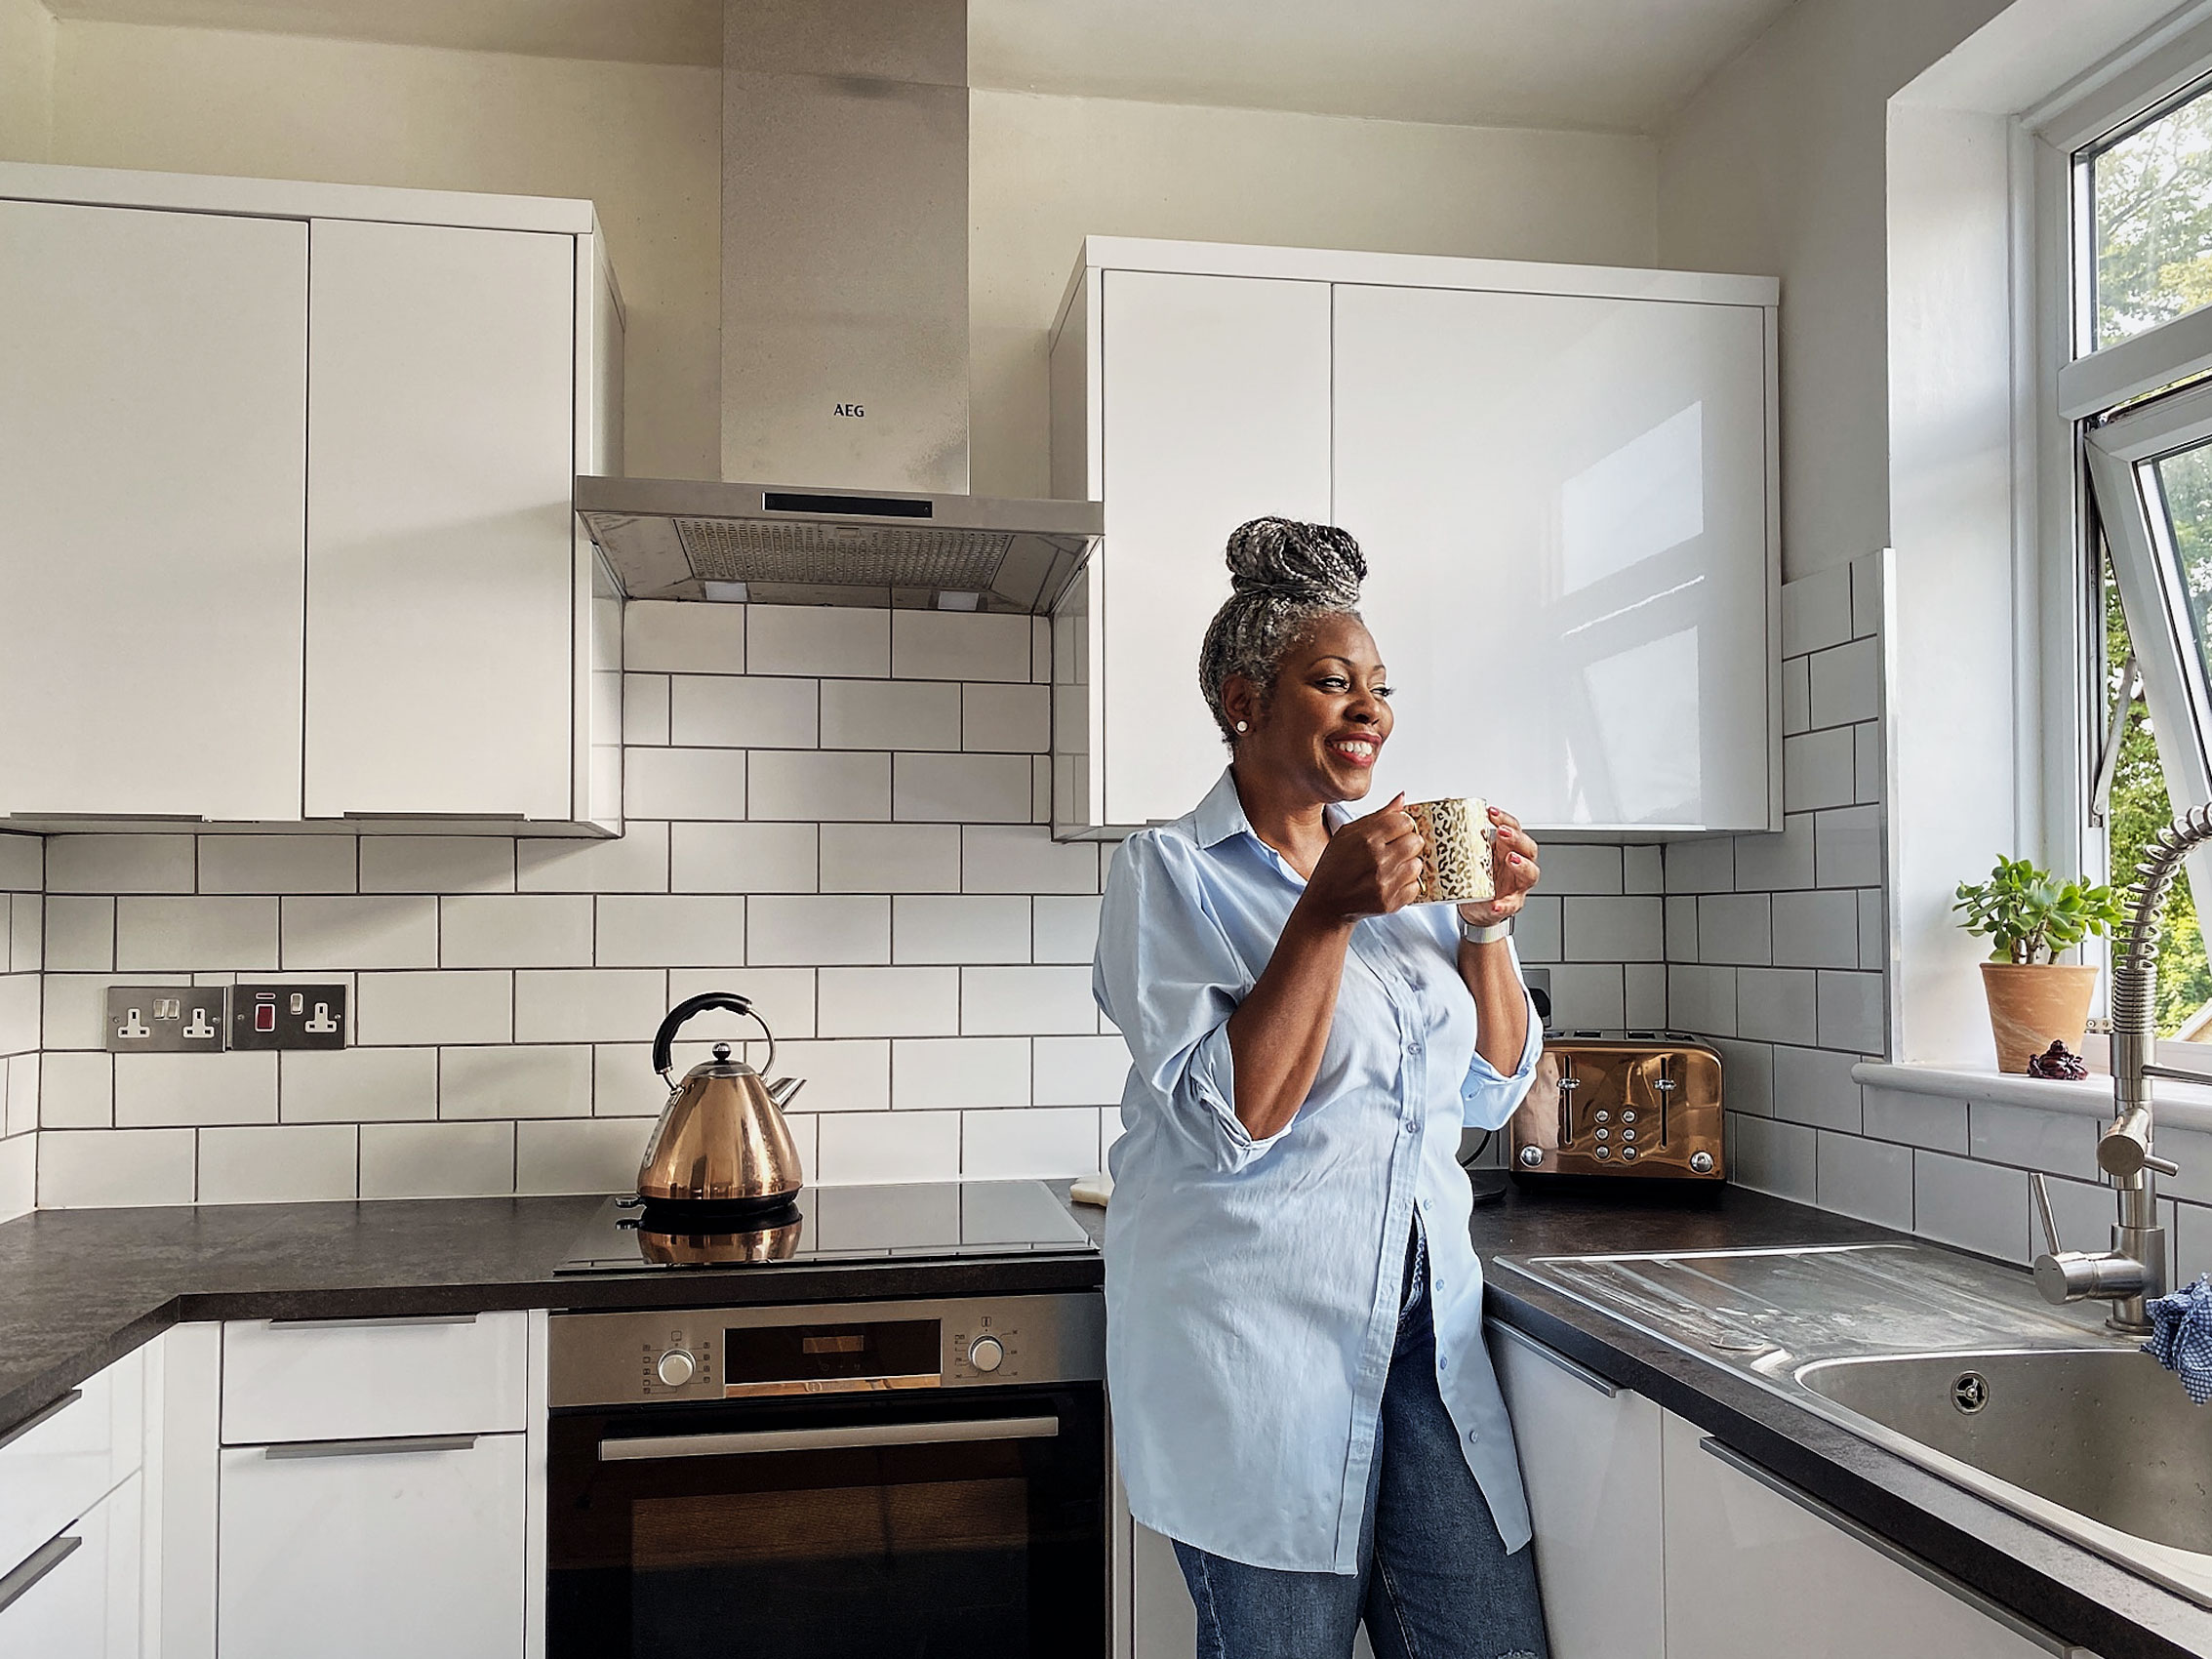 gray-haired-woman-sipping-coffee-in-kitchen-dc-commercial-photography-eli-meir-kaplan